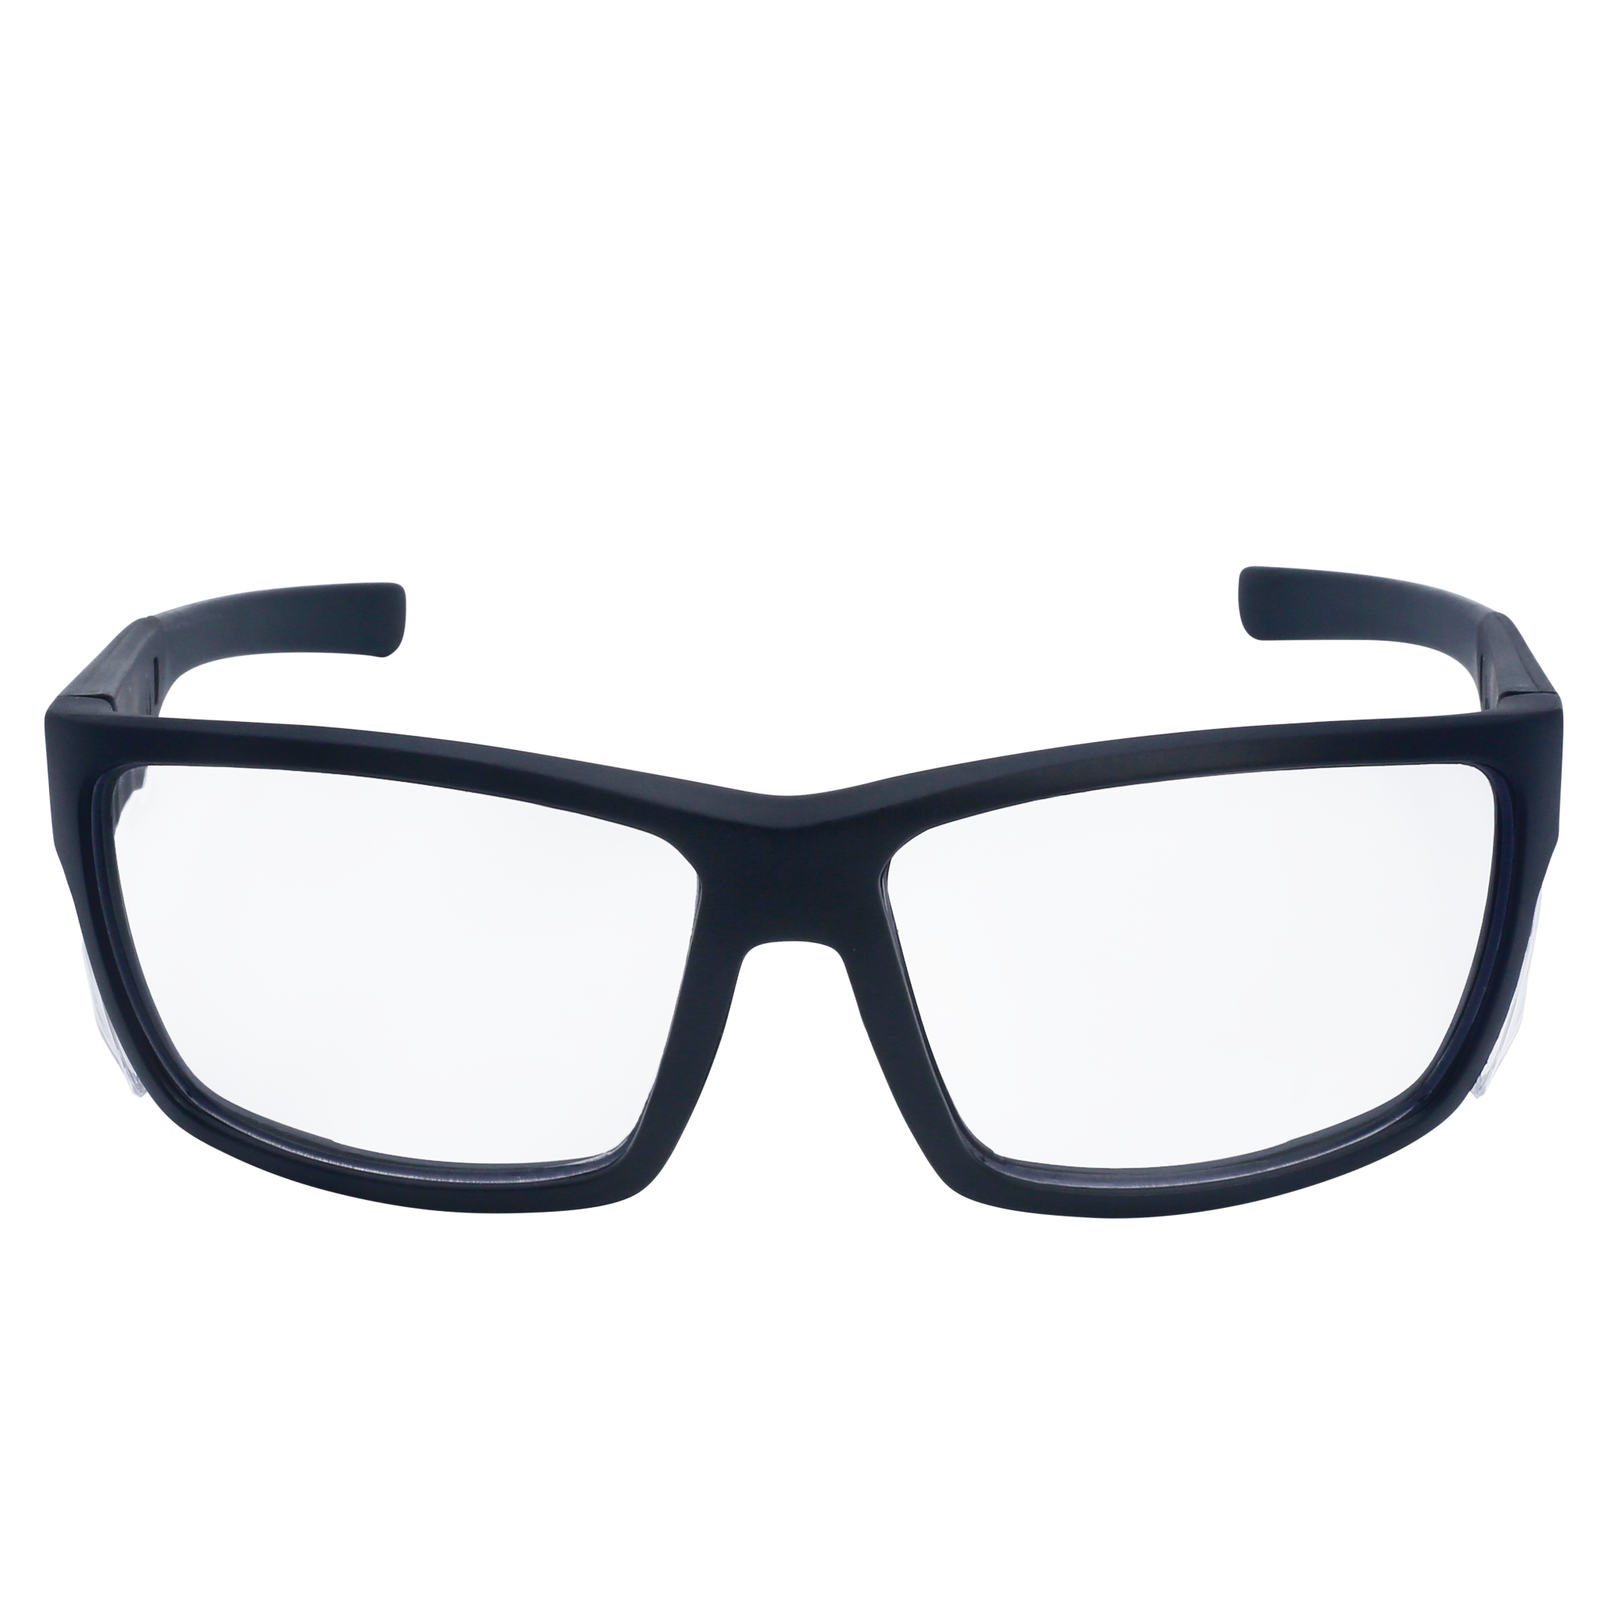 Image shows a front view of a JORESTECH safety Glass with clear side shield for high impact protection. These safety glasses with clear side shields  are ANSI and have black frame and clear polycarbonate lenses. The background of the image is white